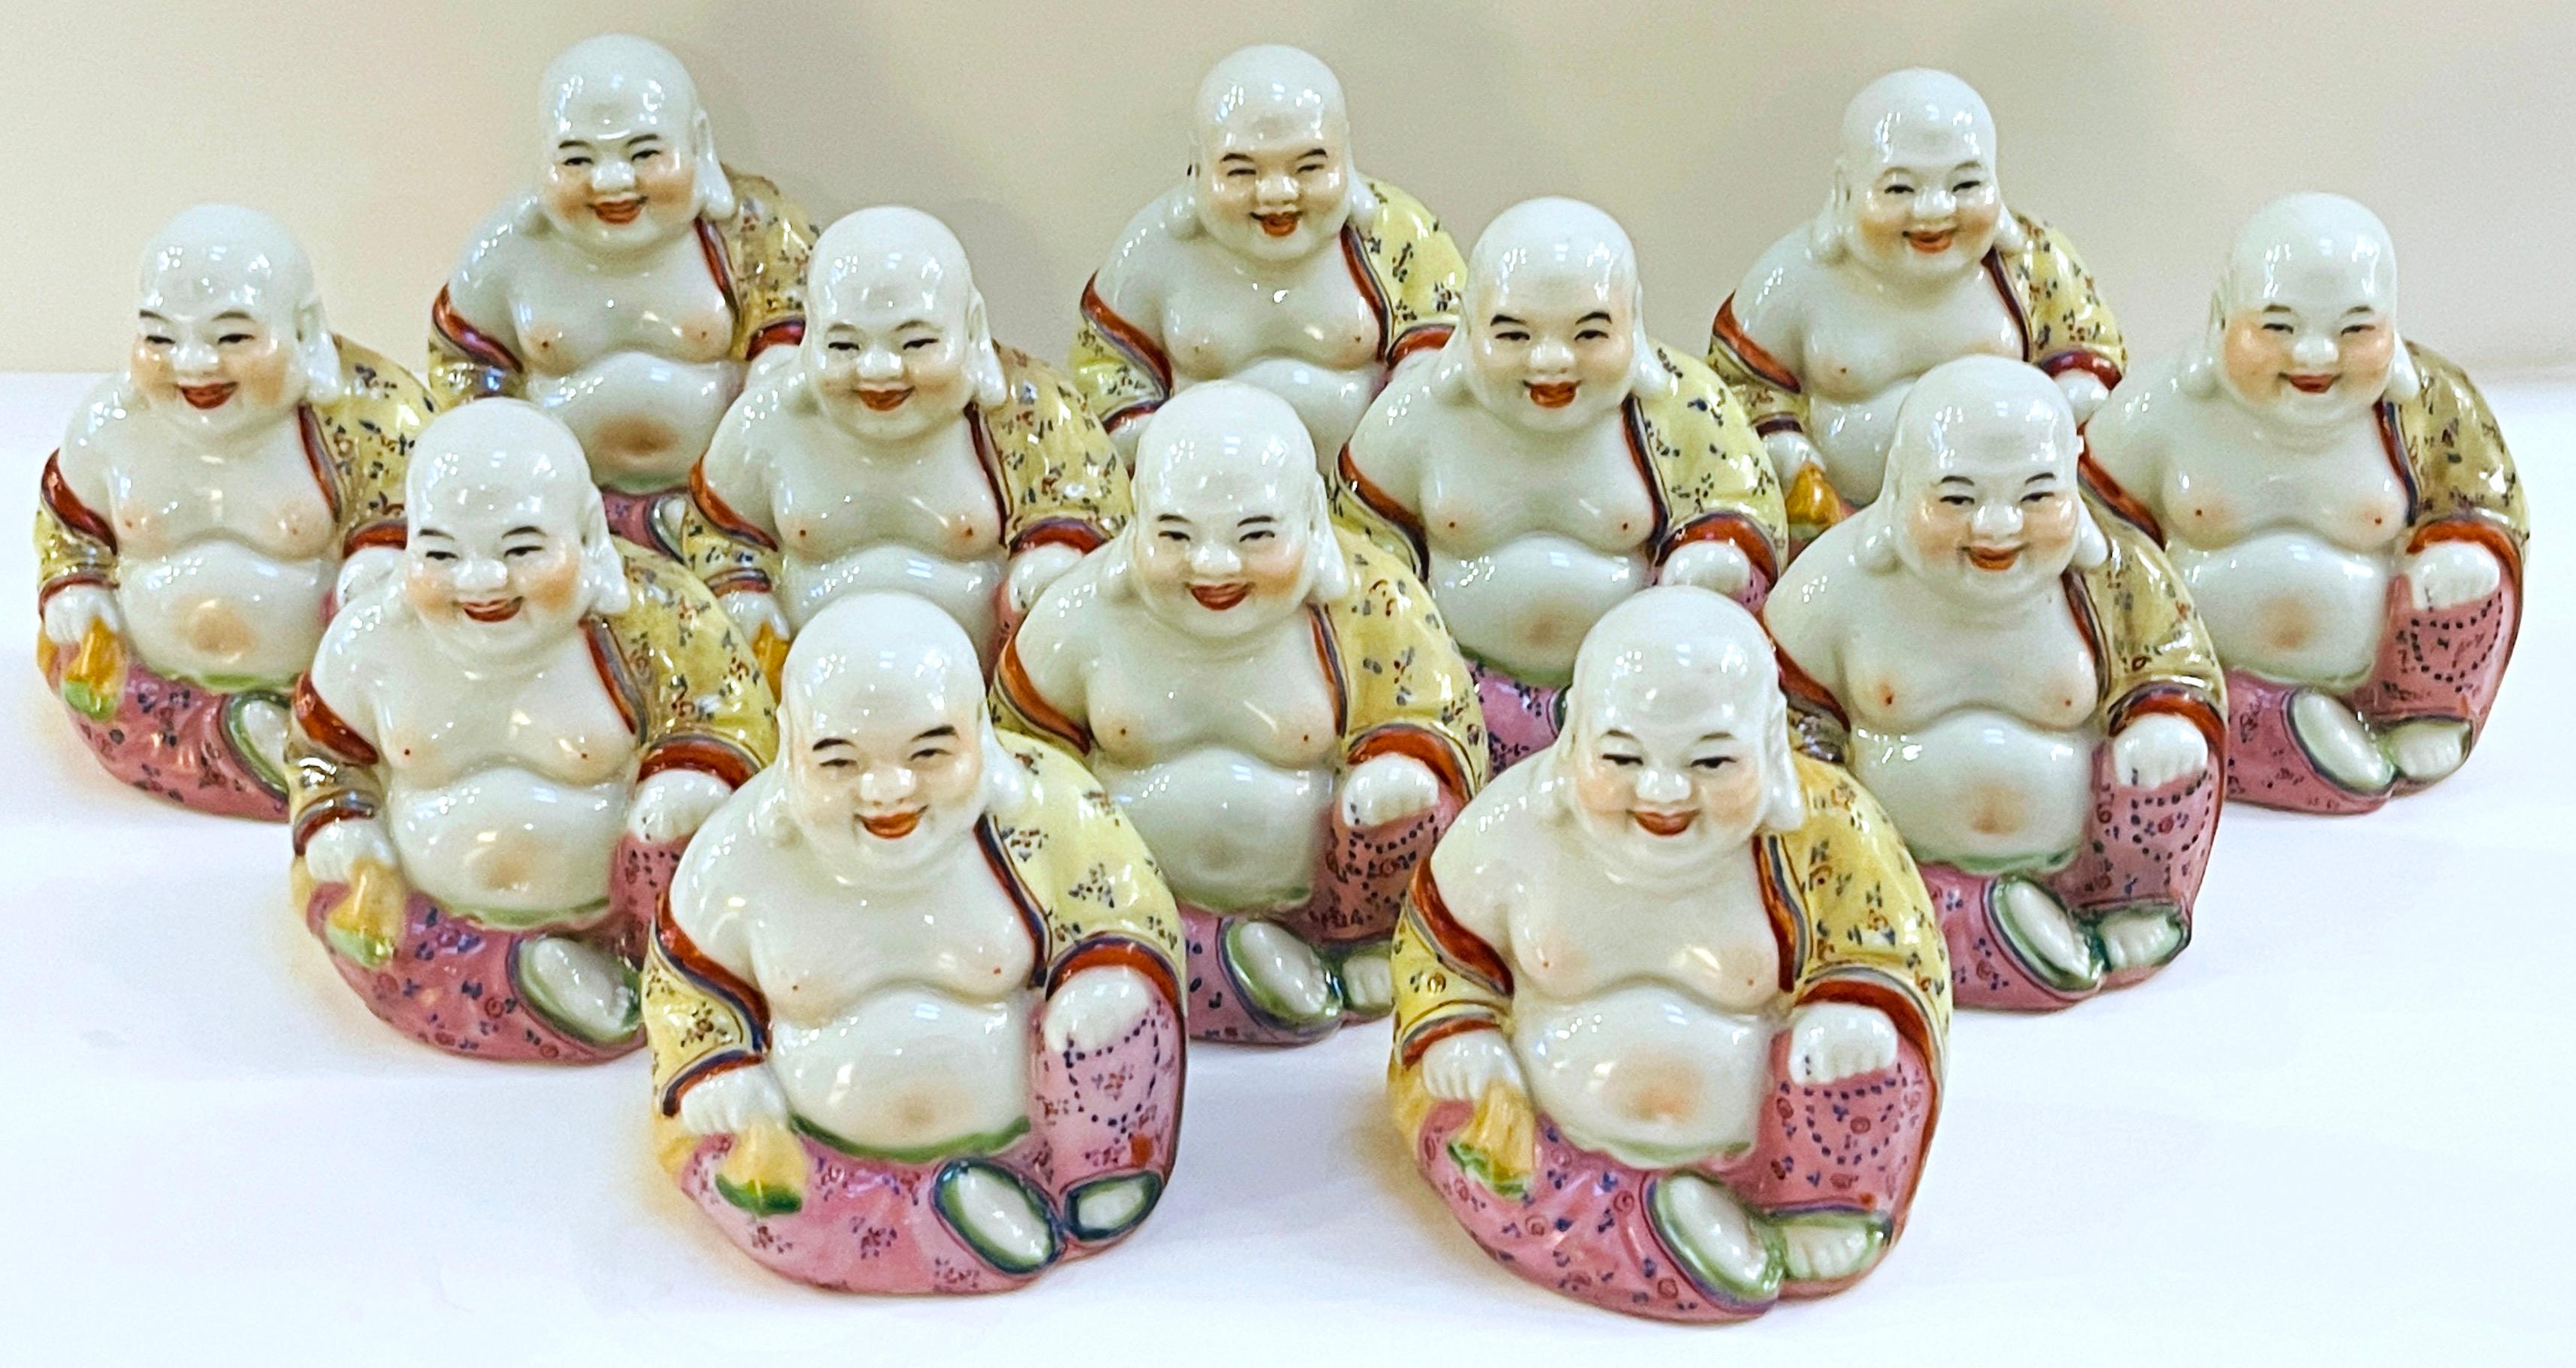 Collection of 12 Chinese Export Famille-Verte Porcelain Diminutive Buddhas 
China, 20th century 

This collection of twelve Chinese export famille-verte porcelain diminutive Buddhas is a remarkable find, showcasing brilliantly executed seated